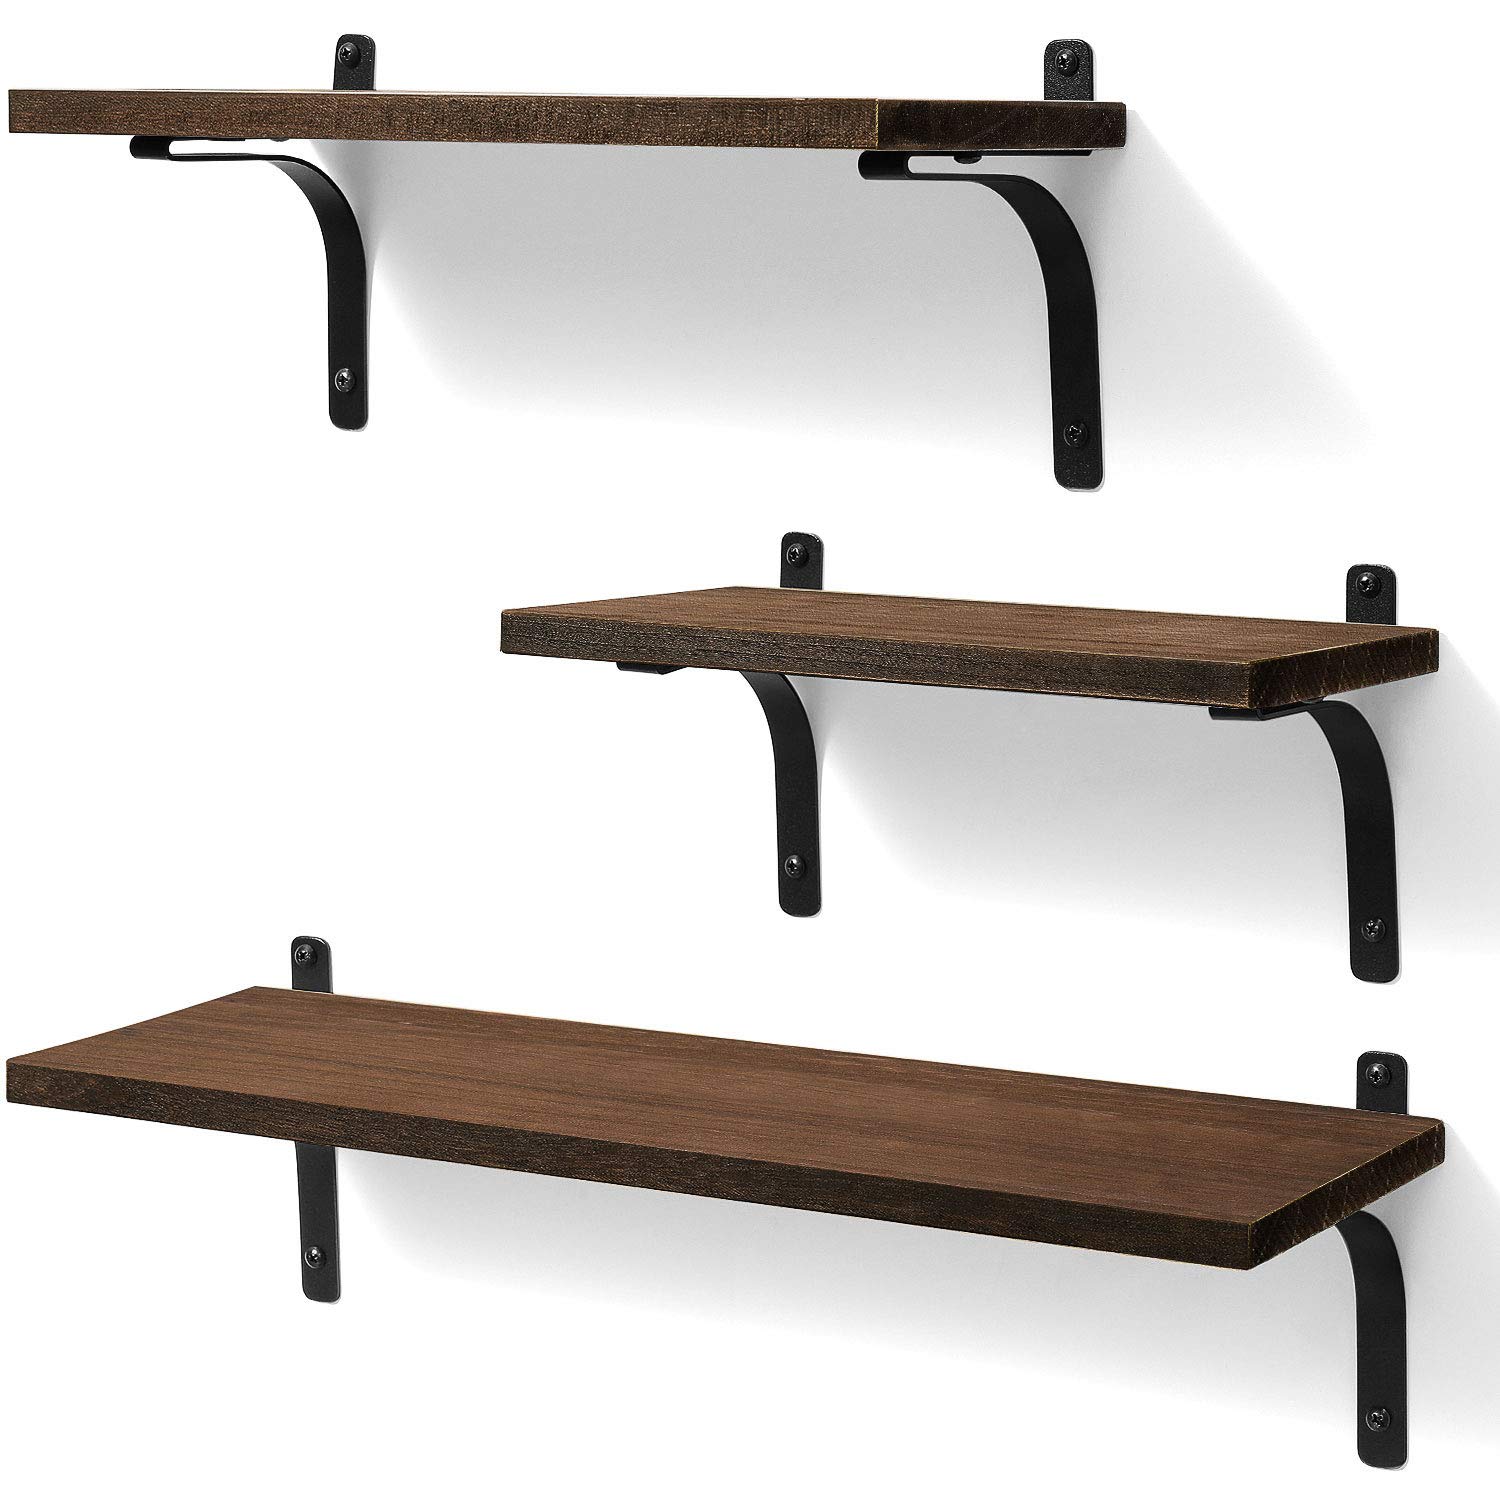 Ophanie Floating Shelves Wall Mounted, Rustic Wood Wall Storage Shelves